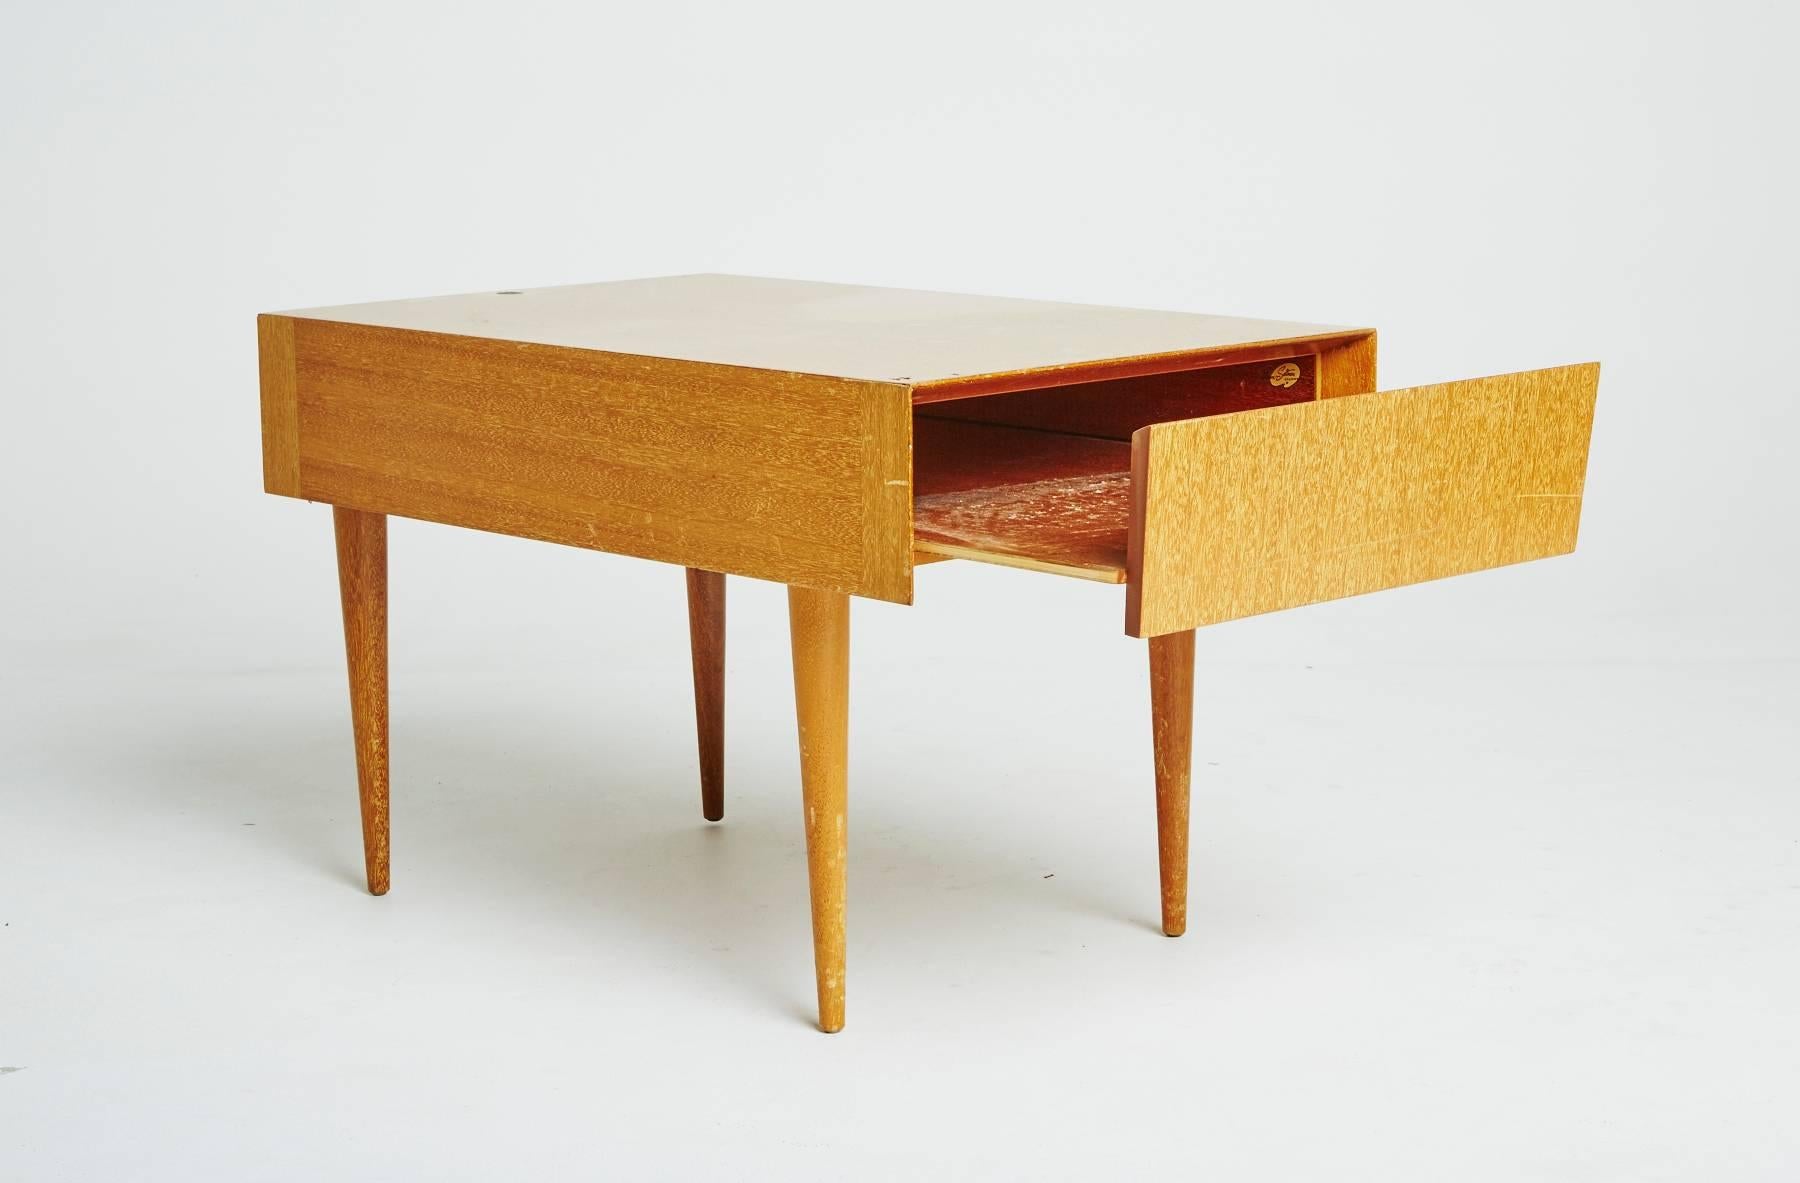 This Mid-Century Modern table by Paul Laszlo is the perfect side table, end table, occasional table, tea table, or nightstand. With tapering legs and a single drawer tabletop, this light mahogany table is a diverse piece of furniture. 

Perfectly